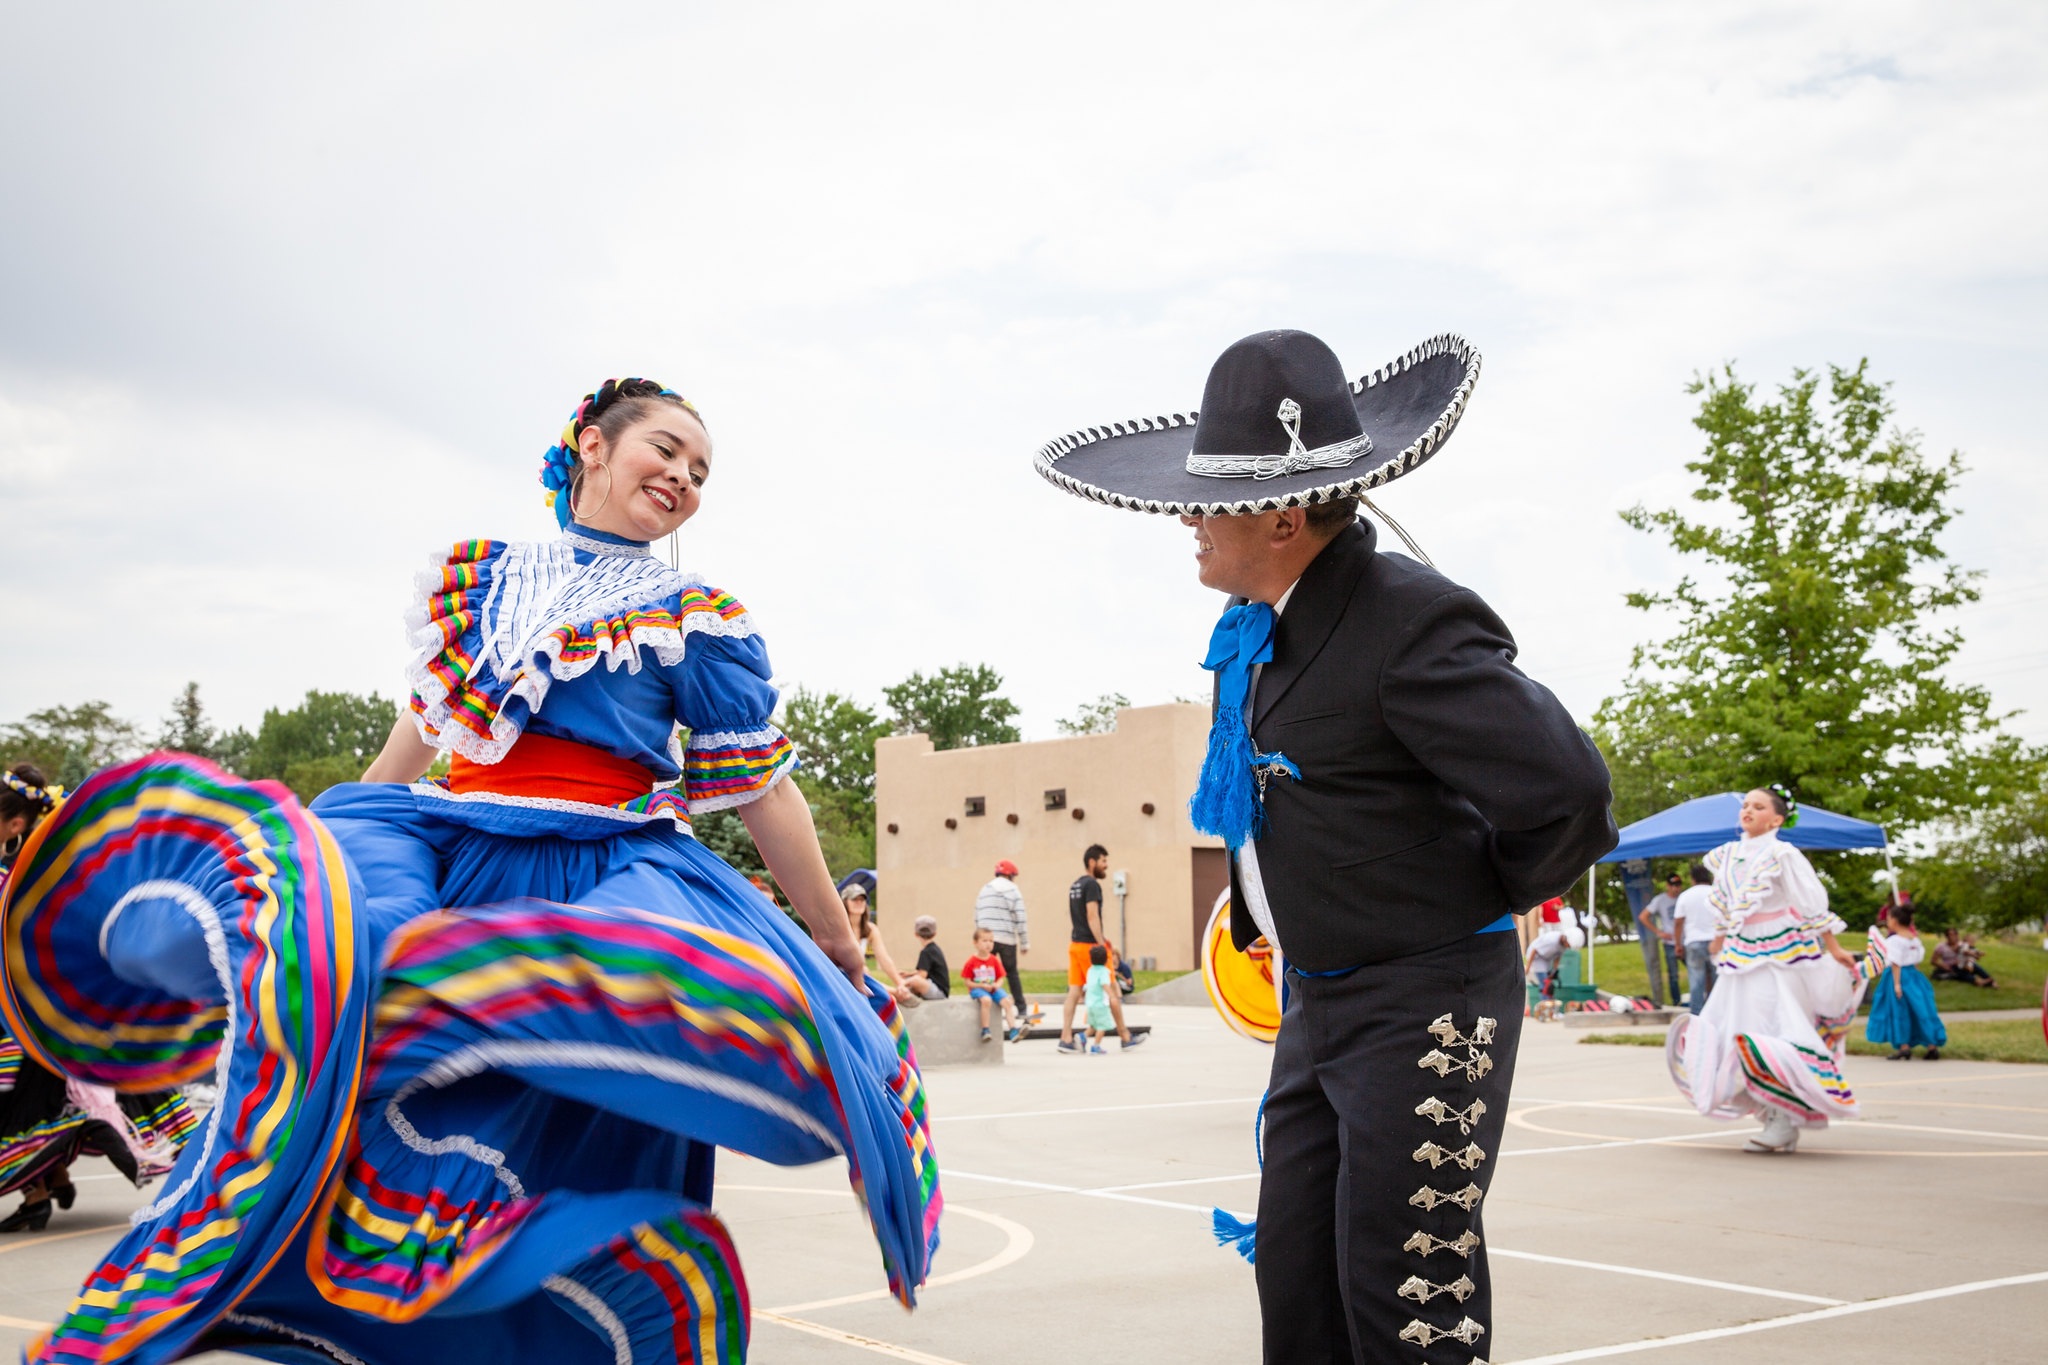 Hispanic heritage dancers in Fort Collins, Colorado - John Robson Community Lifestyle Photography